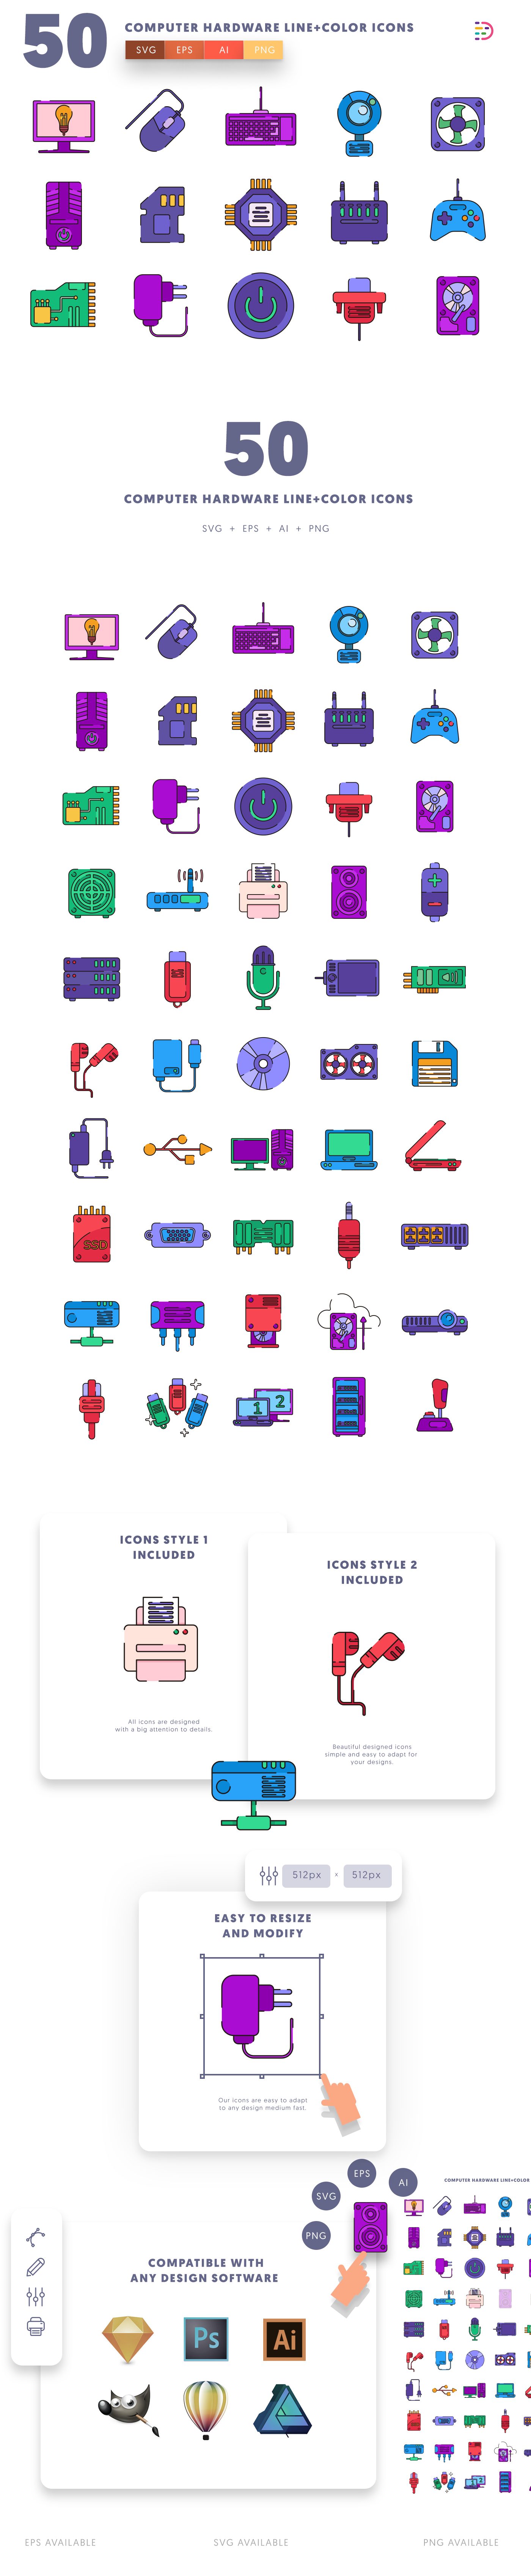 Editable Computer Hardware Line Color icons icon pack, easy to edit and customize icons